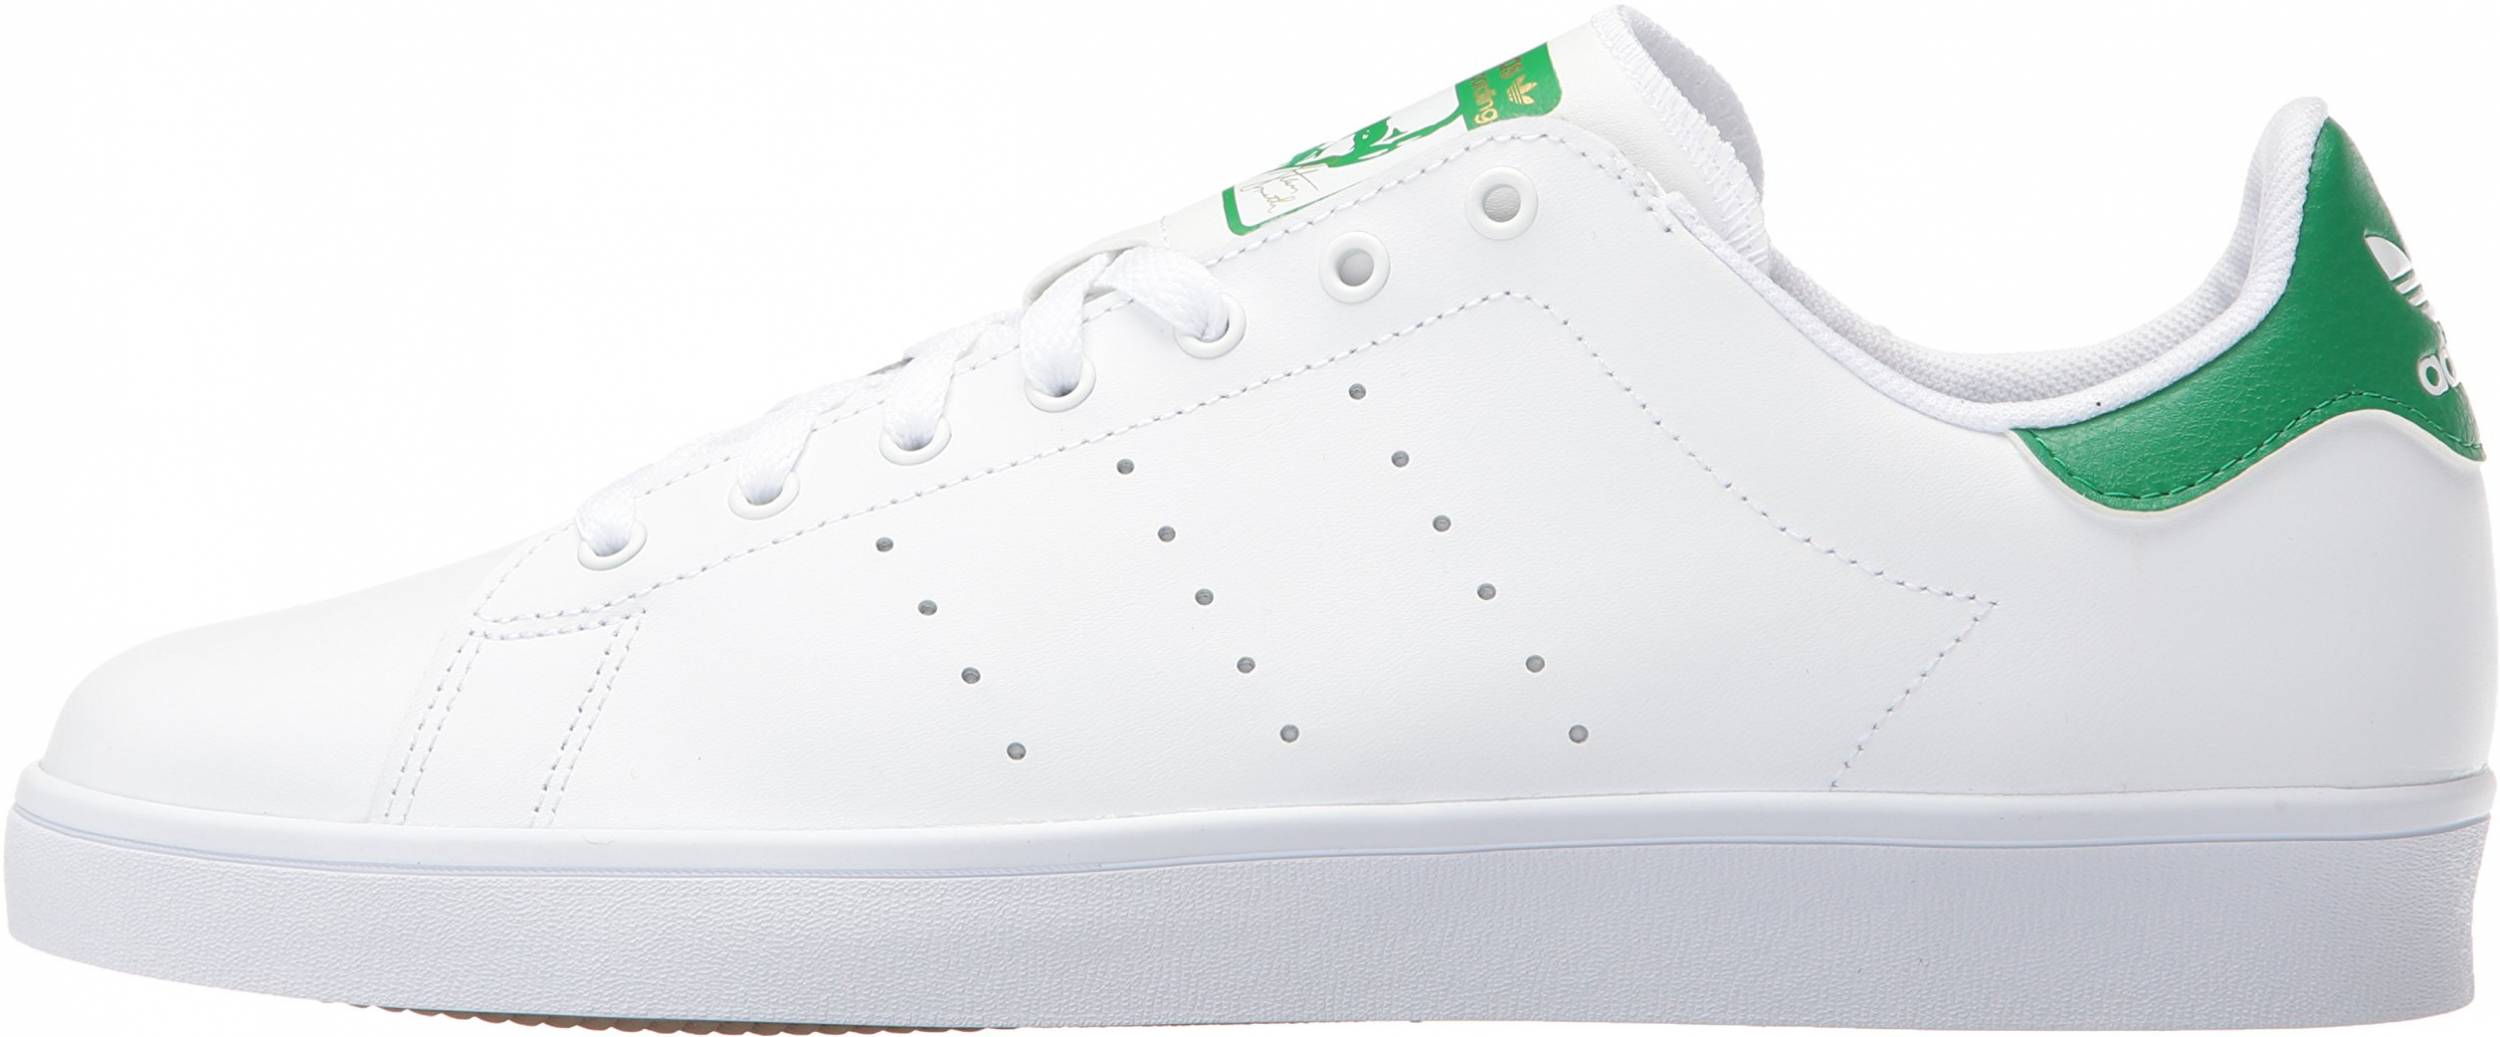 Civilian radical ecstasy Adidas Stan Smith Vulc sneakers in 4 colors (only $50) | RunRepeat